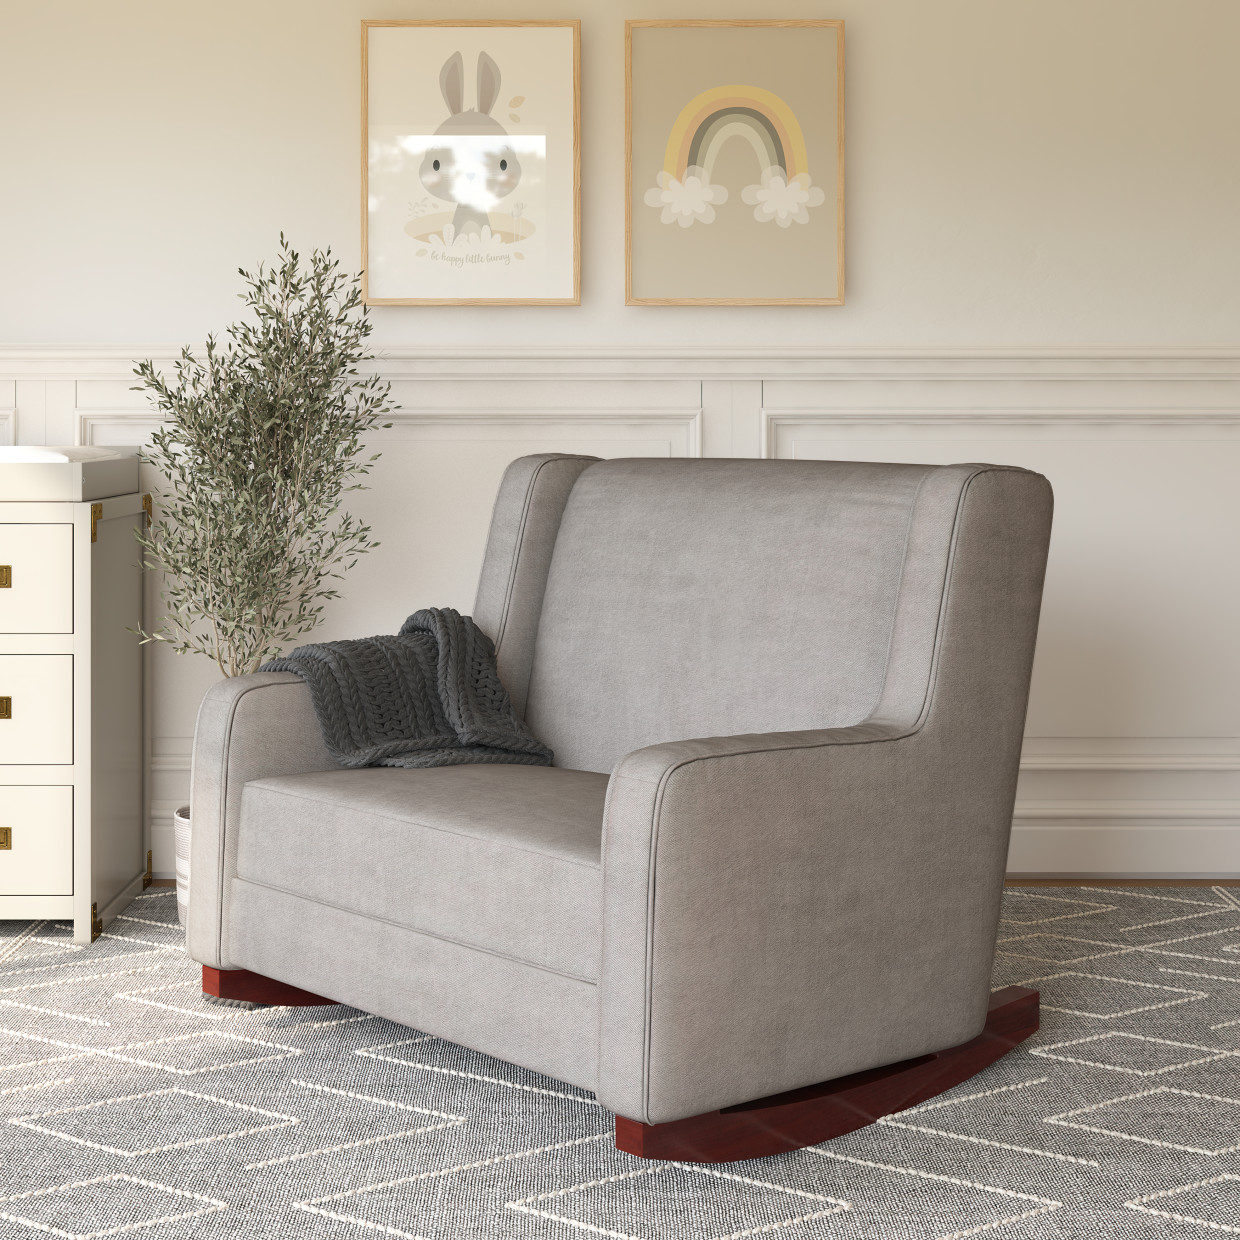 Baby Relax Hadley Upholstered Double Rocker Chair - Taupe Microfiber.